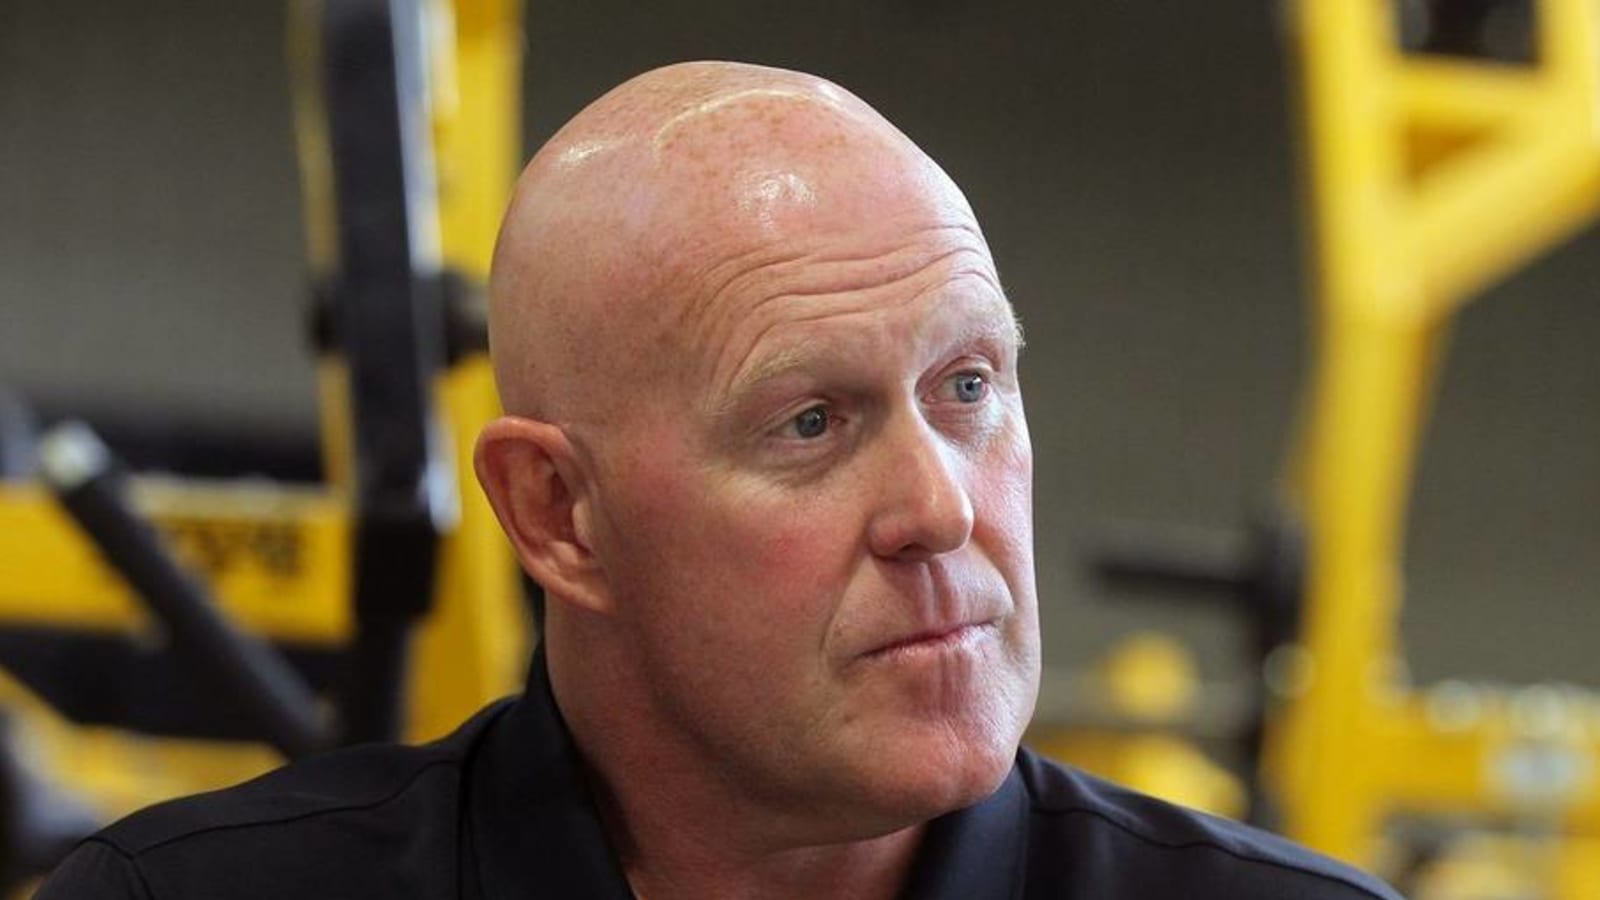 Iowa strength coach issues statement over racism allegations